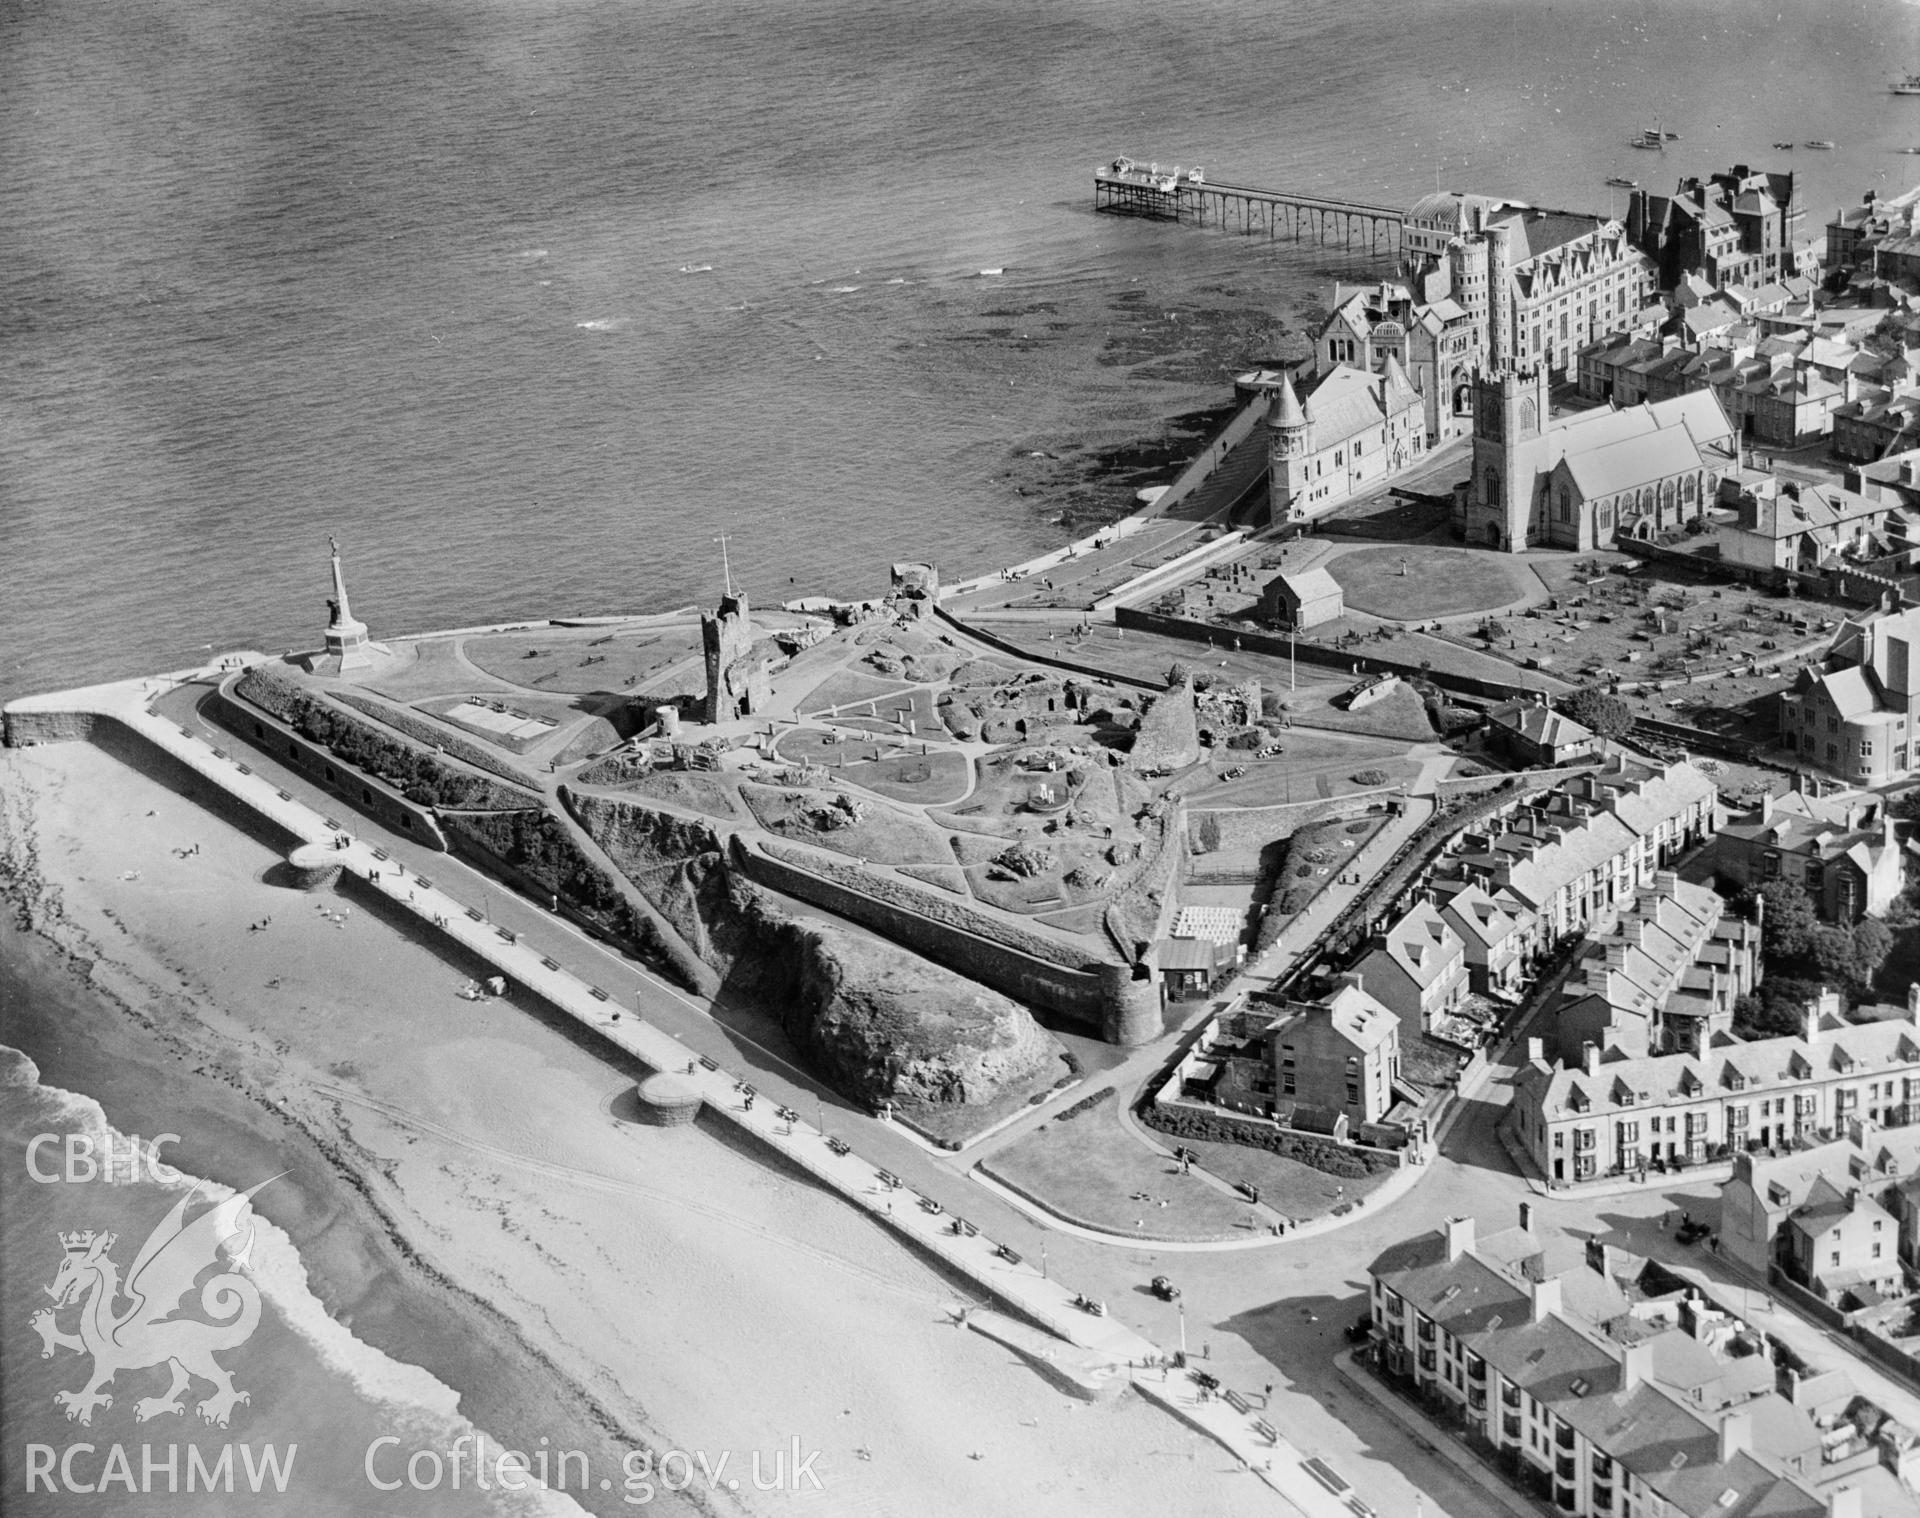 General view of Aberystwyth showing the castle, Old College, Pier, St Michael's church, war memorial, note also the Great War tank presented to the town as appreciation of fund-raising efforts of the townspeople, oblique aerial view. 5? x 4? black and white glass plate negative.